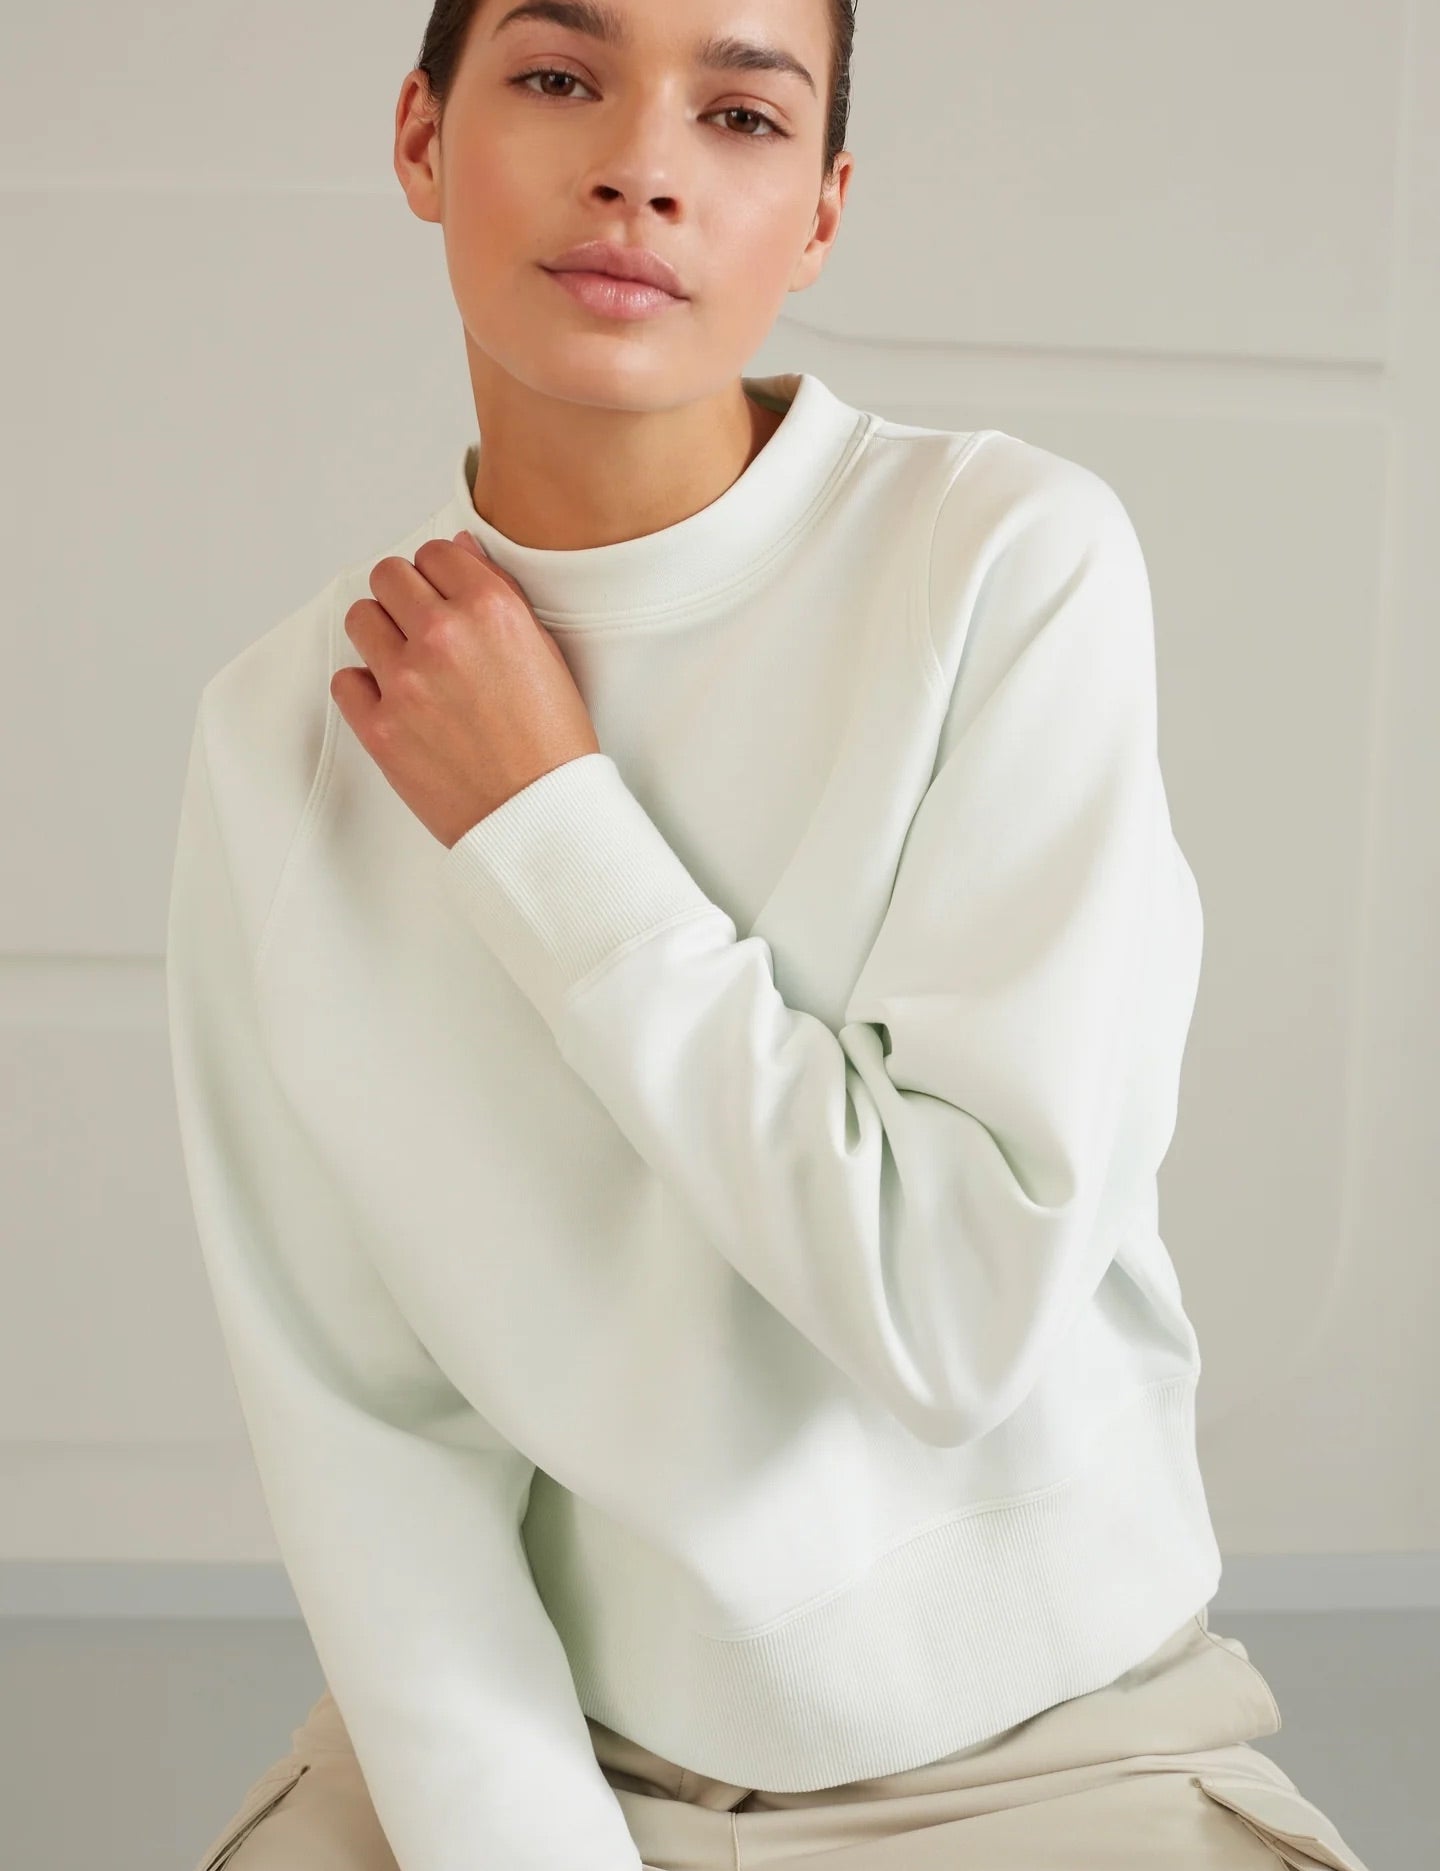 sweatshirt-with-crewneck-long-sleeves-and-dropped-armholes-hint-of-mint-green_749492cb-1735-4aa0-a97b-ad21d0a5a02b_2880x_jpg.jpg